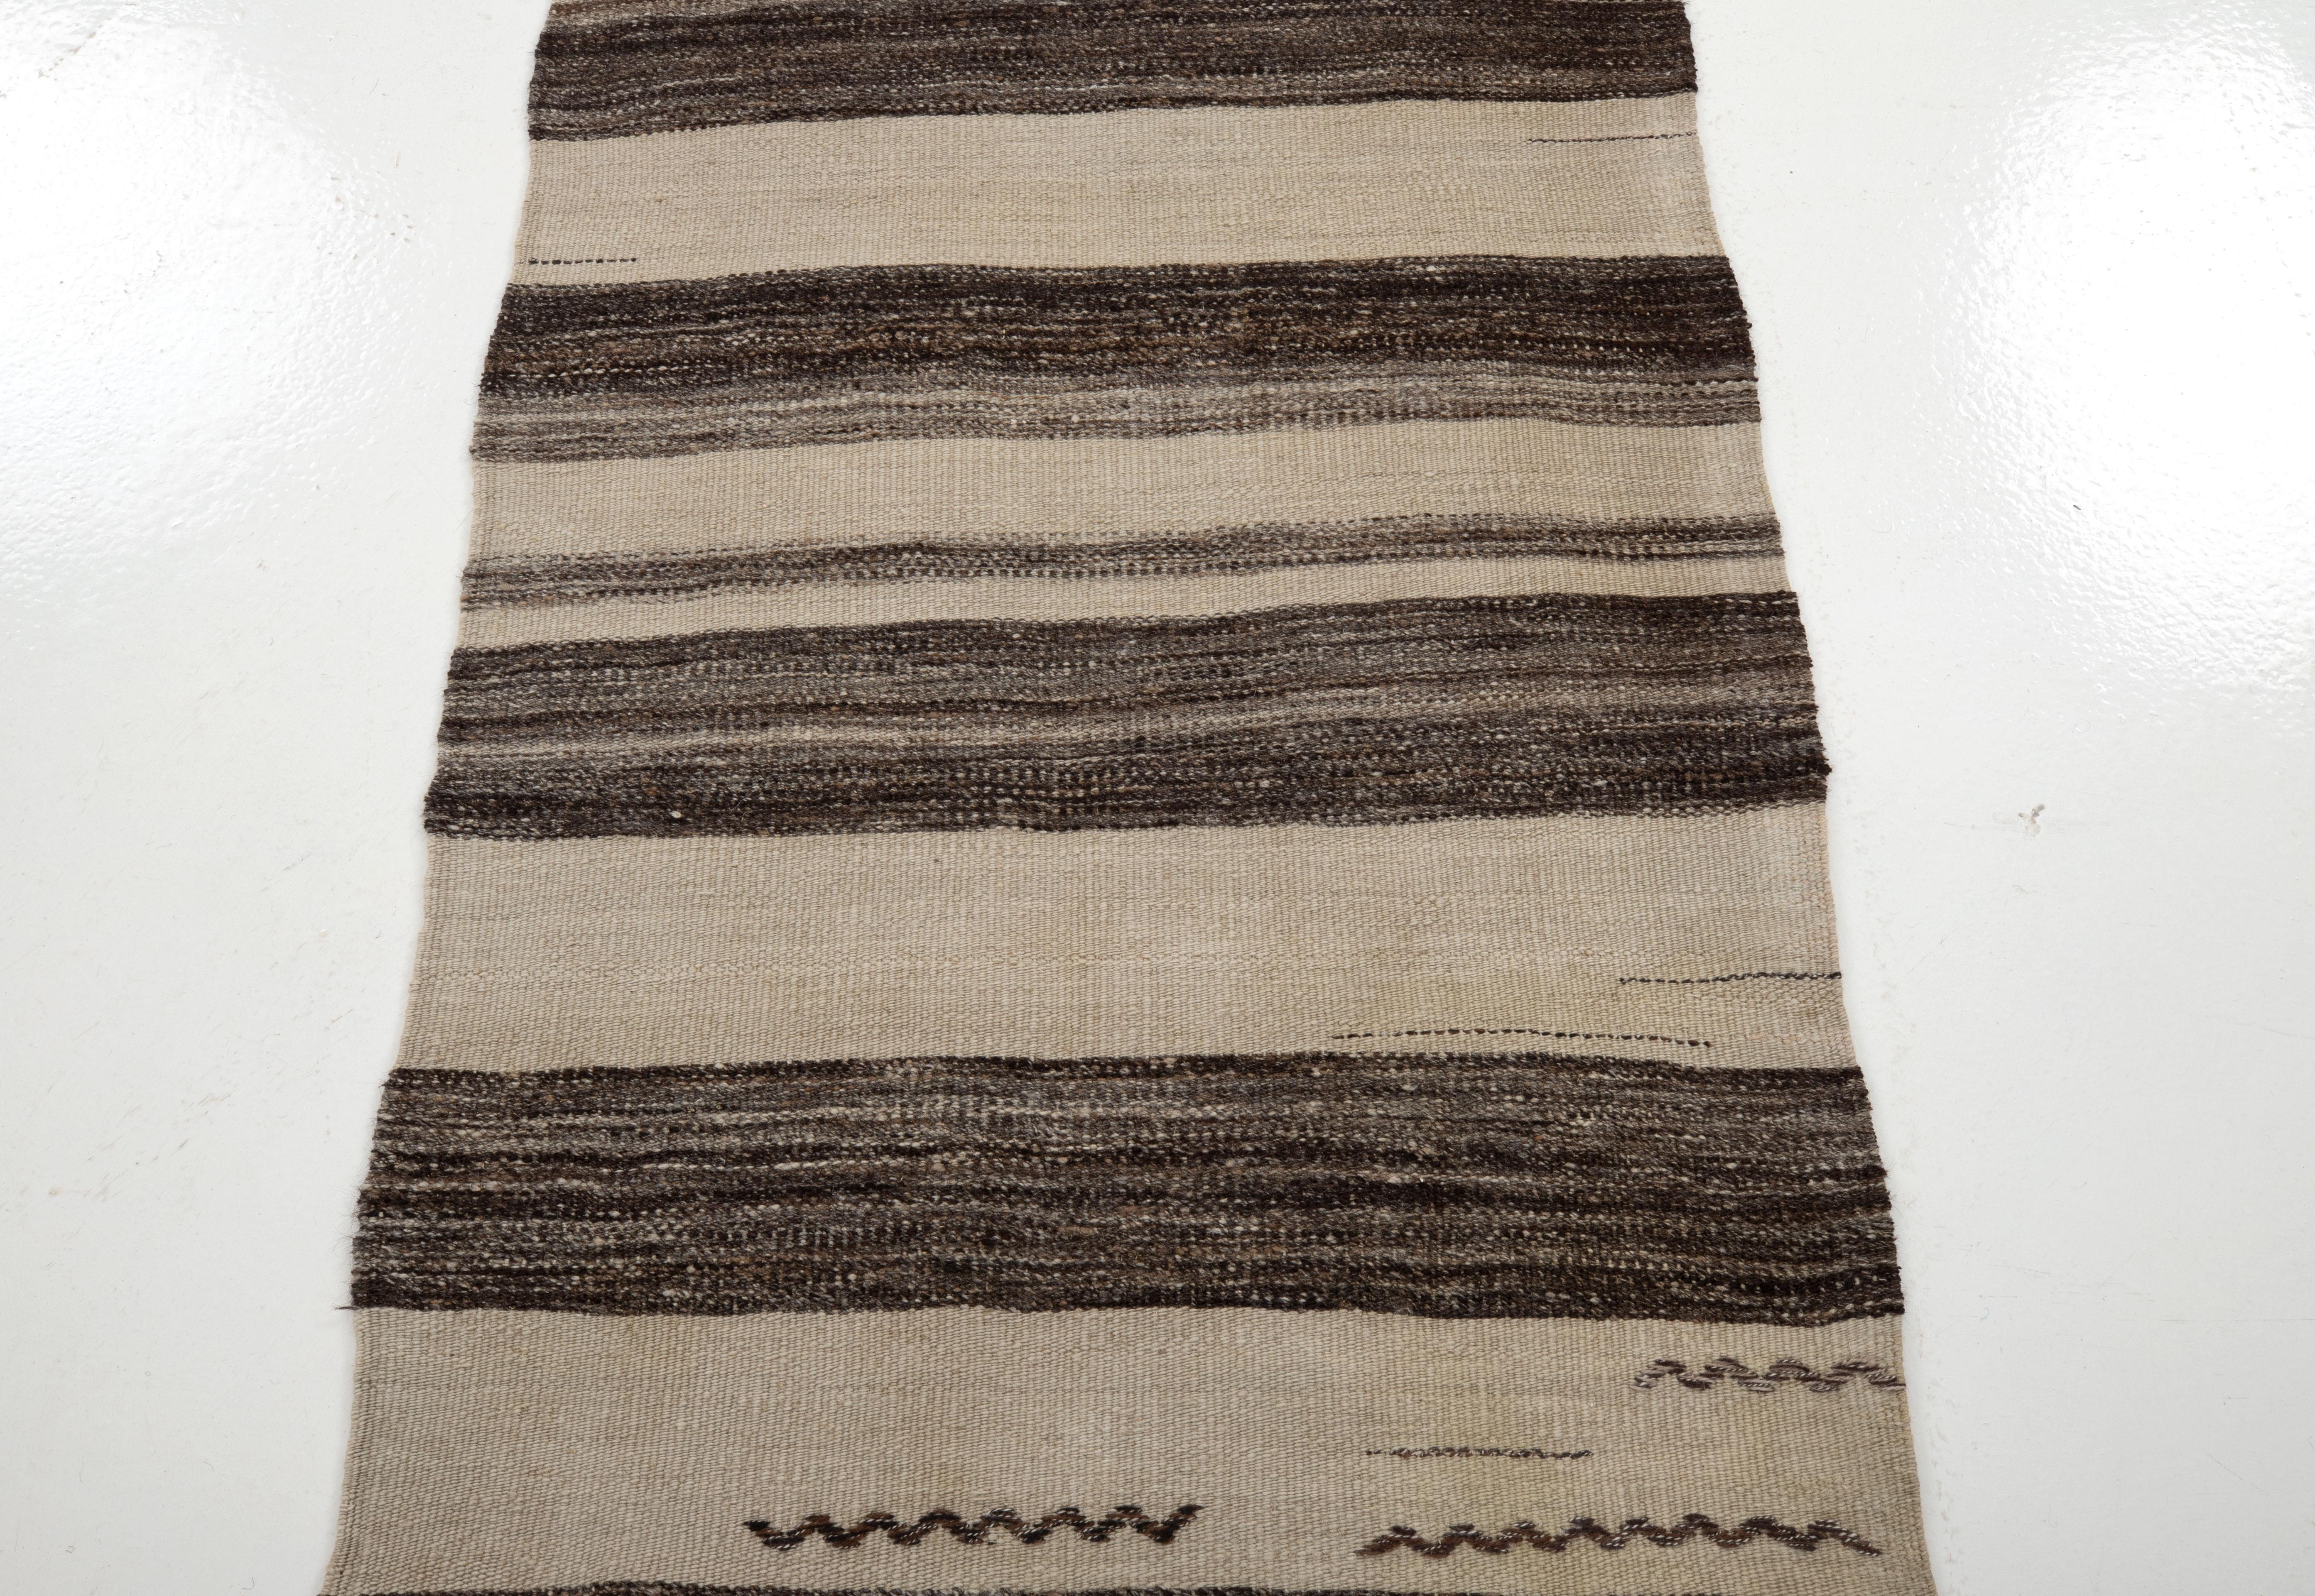 Hand-Woven Wide Runner Vintage Anatolian Kilim, Goat Hair and Wool Mix, Mid-20th Century For Sale